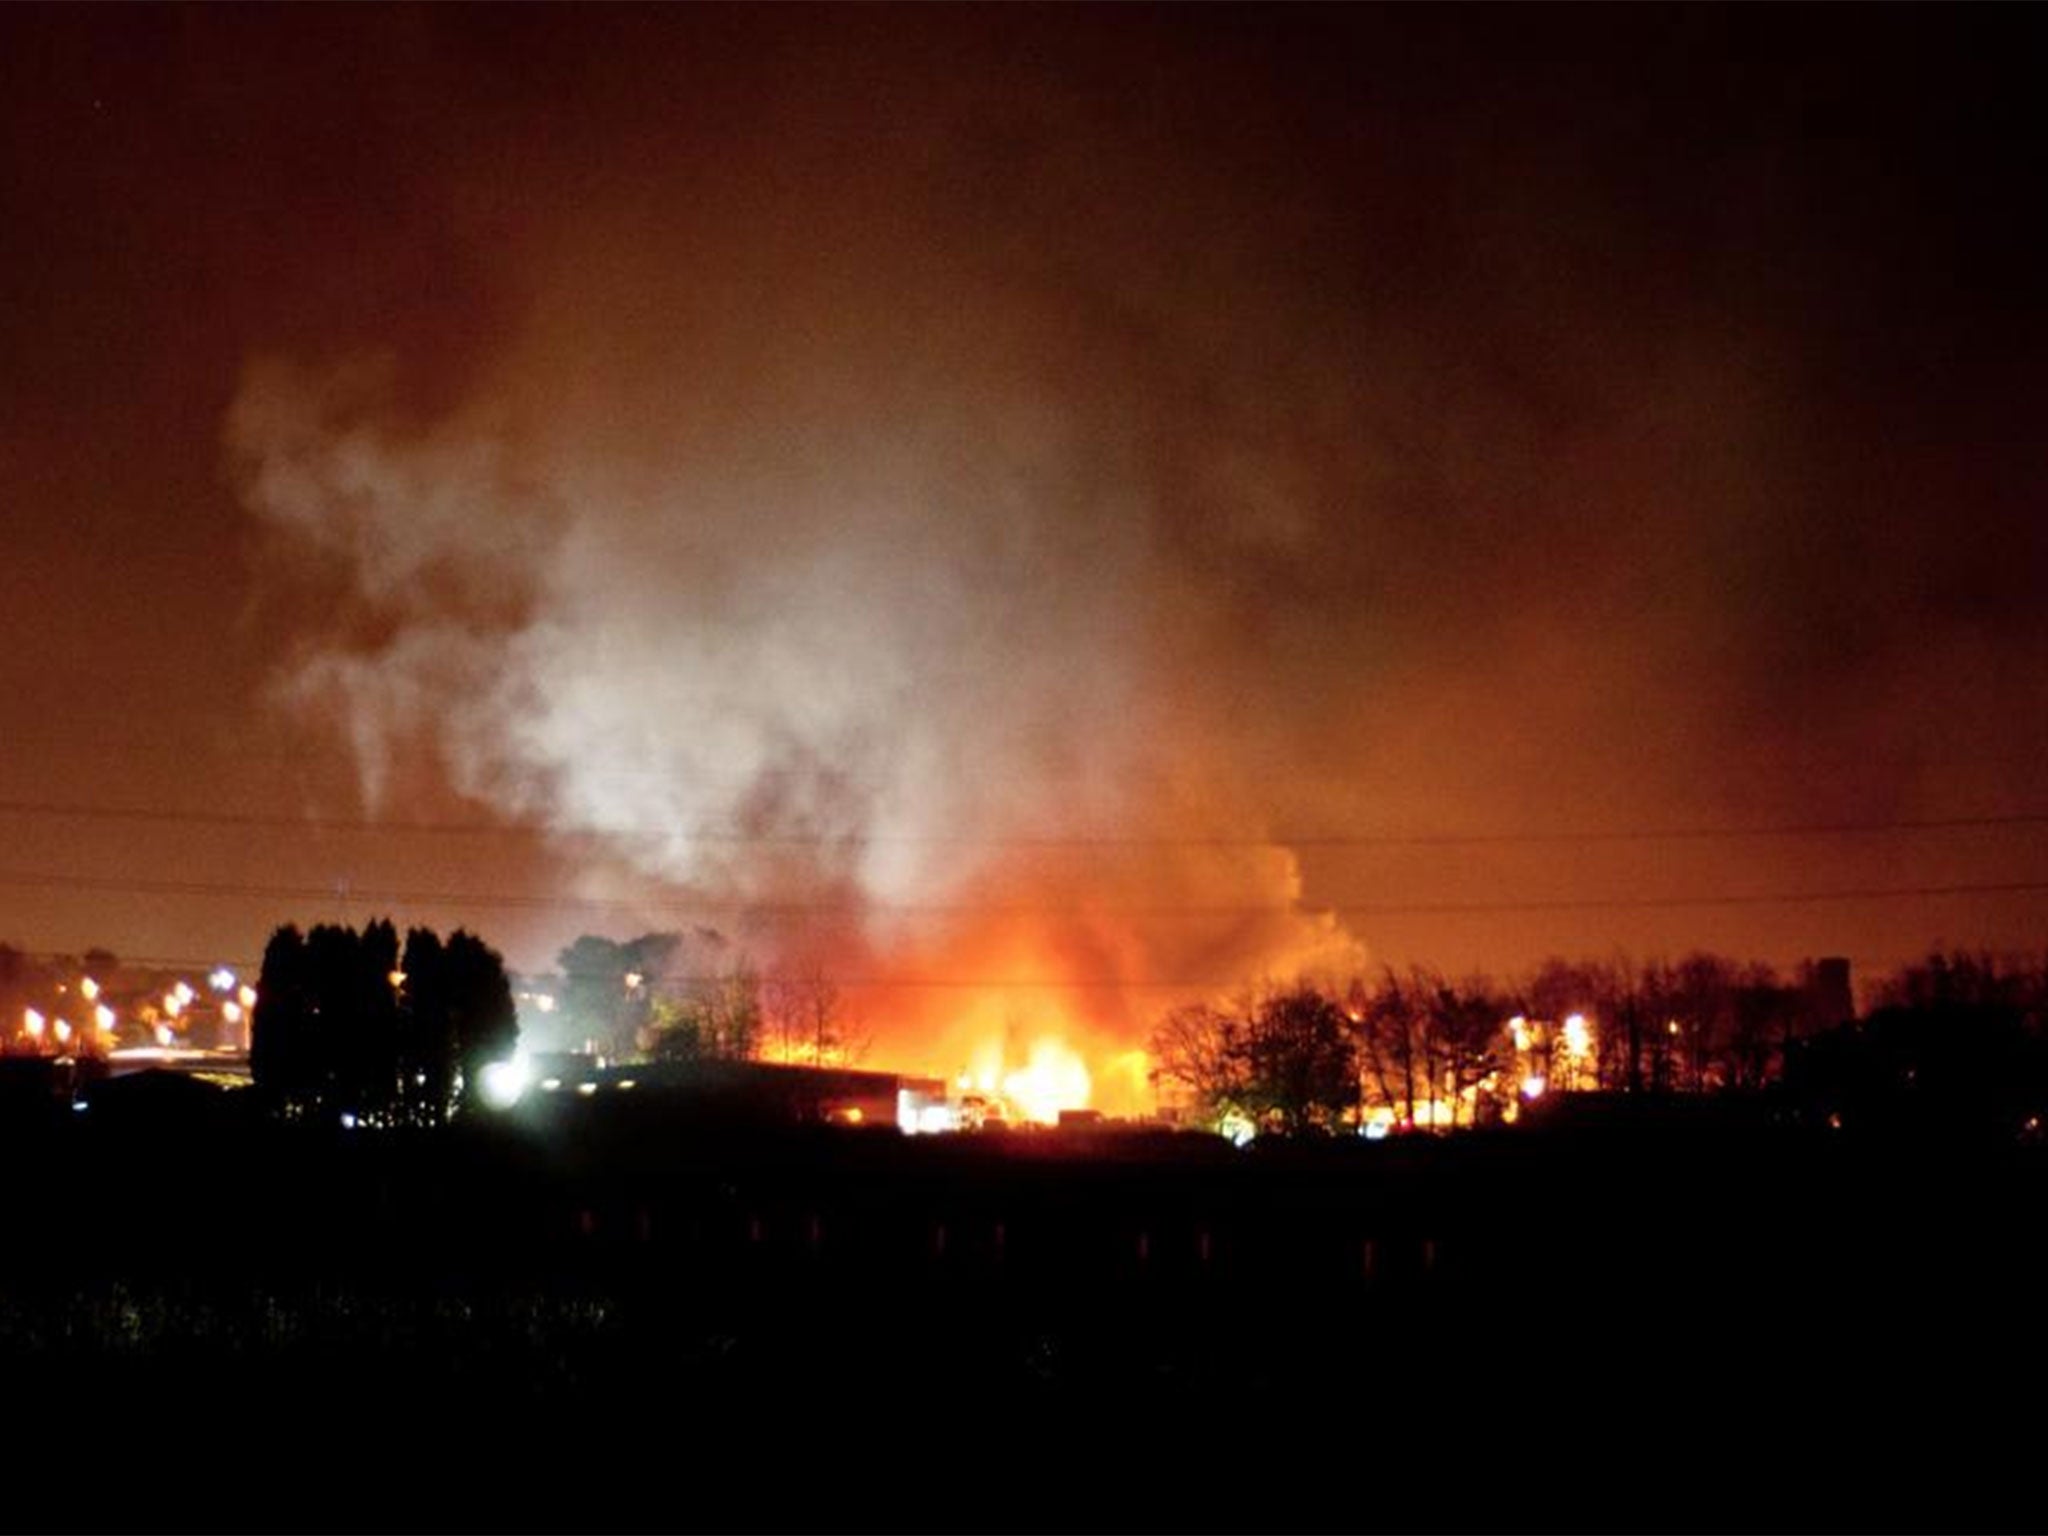 A blaze at a fireworks factory in Stafford